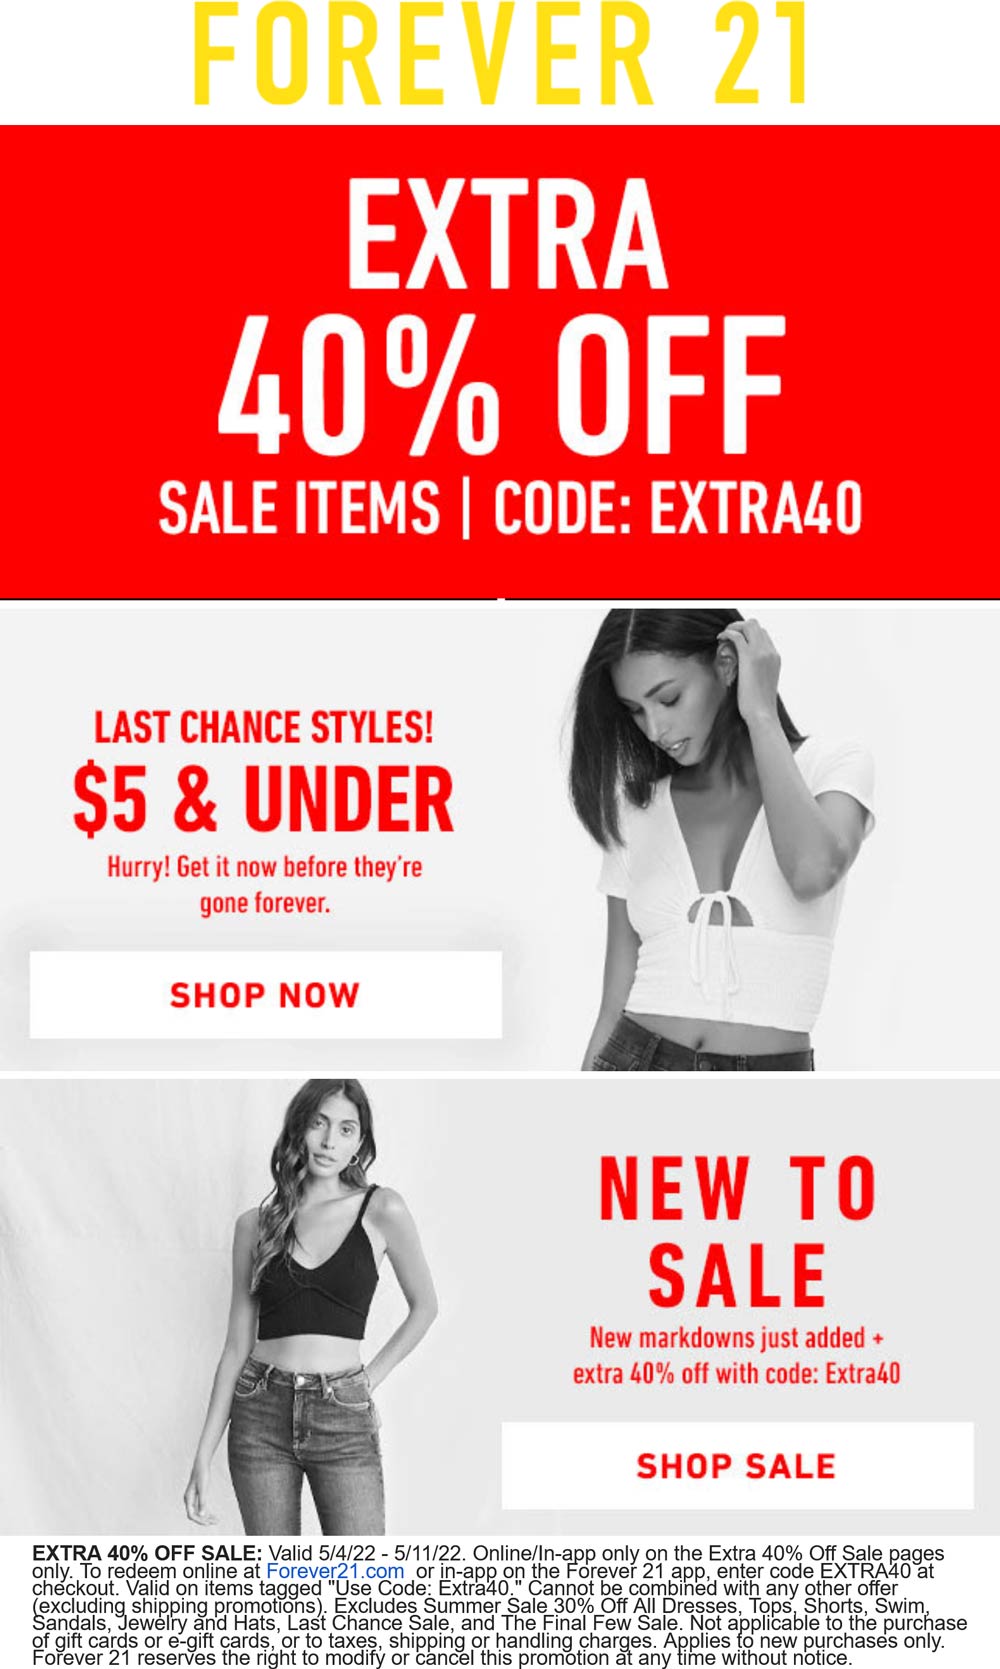 Forever 21 stores Coupon  Extra 40% off sale items online at Forever 21 via promo code EXTRA40 #forever21 